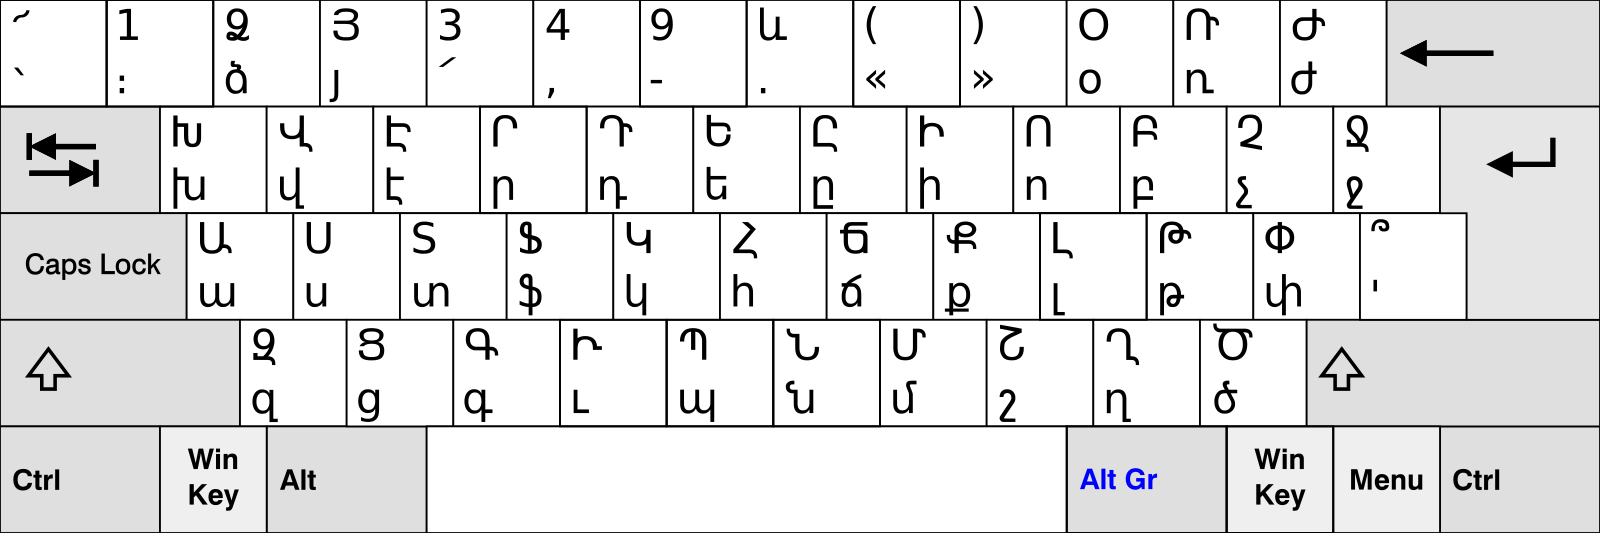 Western Armenian keyboard layout. It differs from the Eastern layout in that the pairs ւ-վ, բ-պ, ք-կ, and դ-տ are reversed.